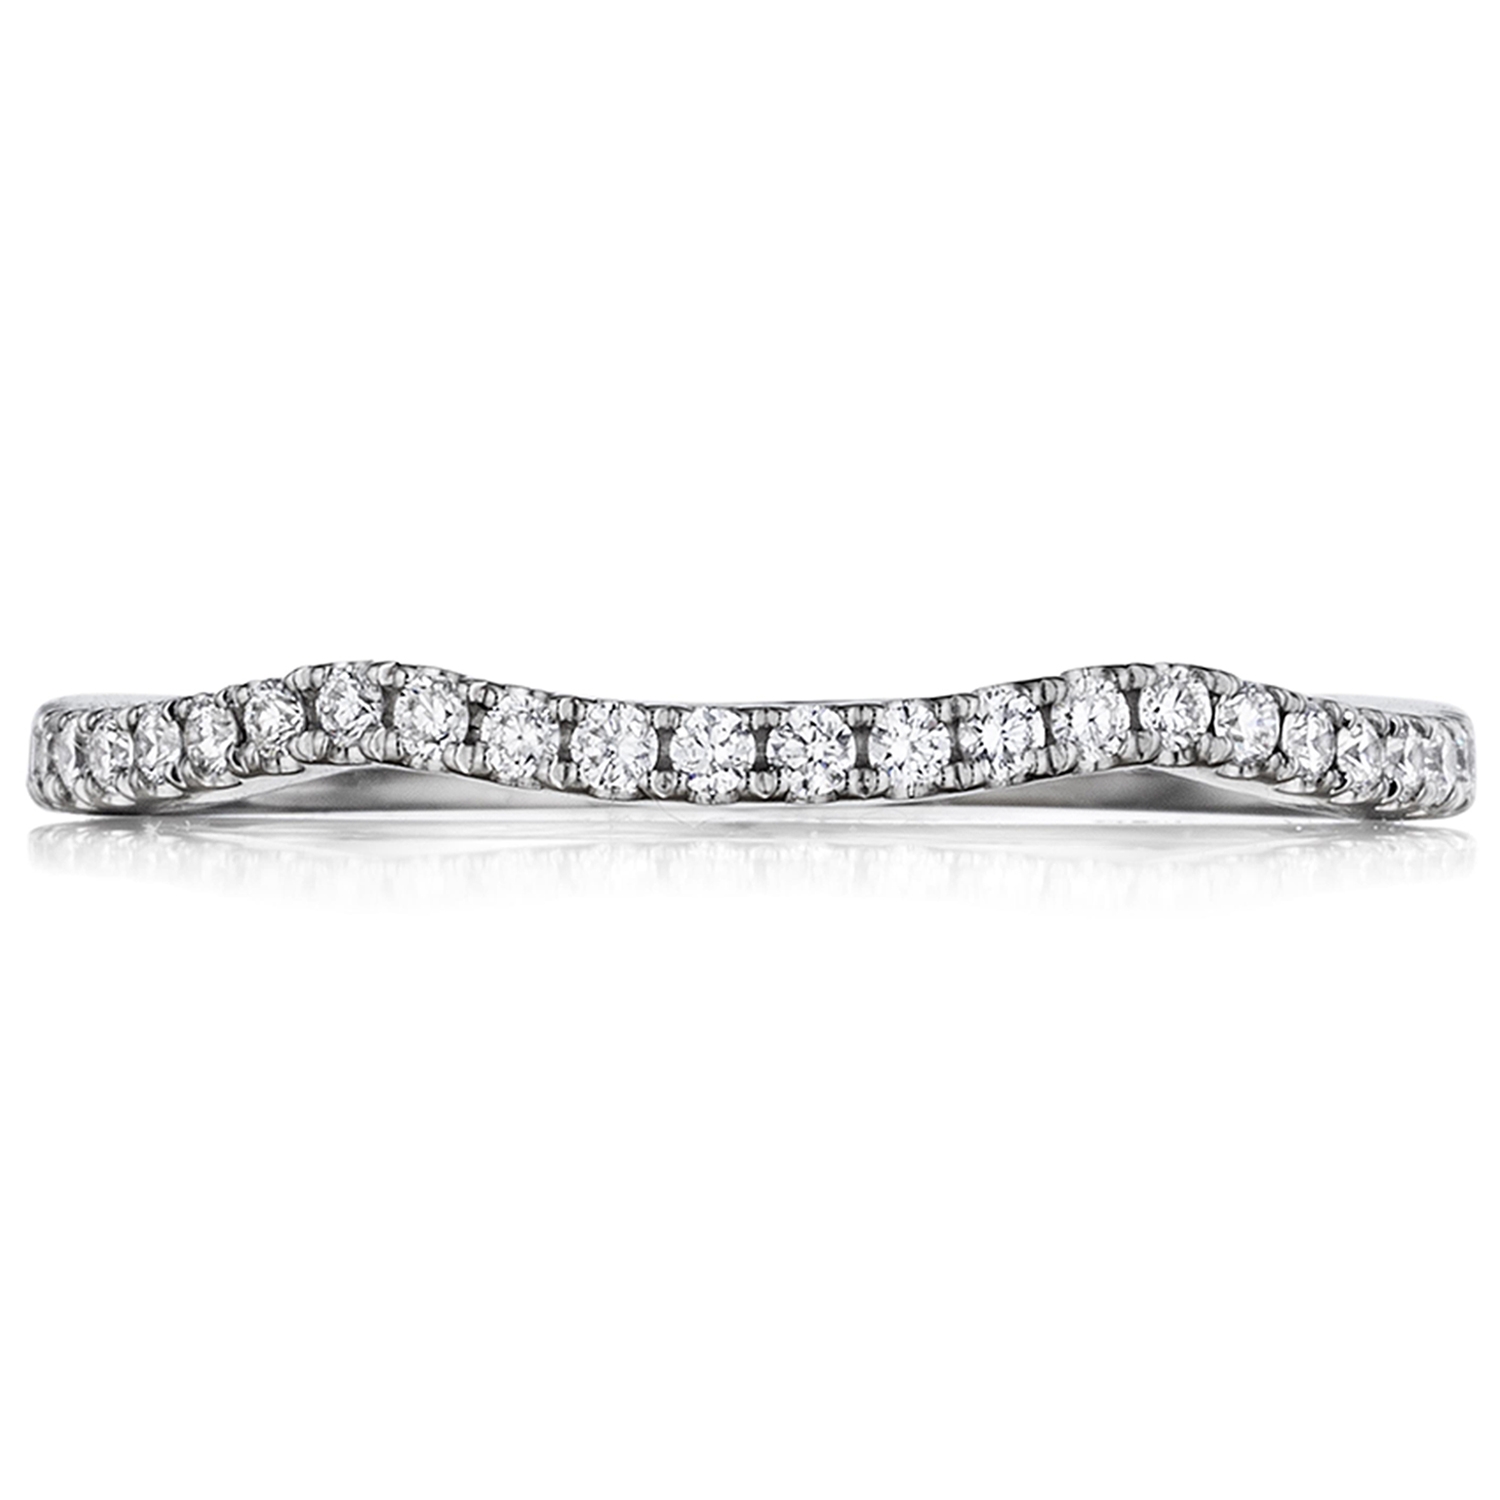 Henri Daussi WBWK Fitted Curved Diamond Wedding Ring